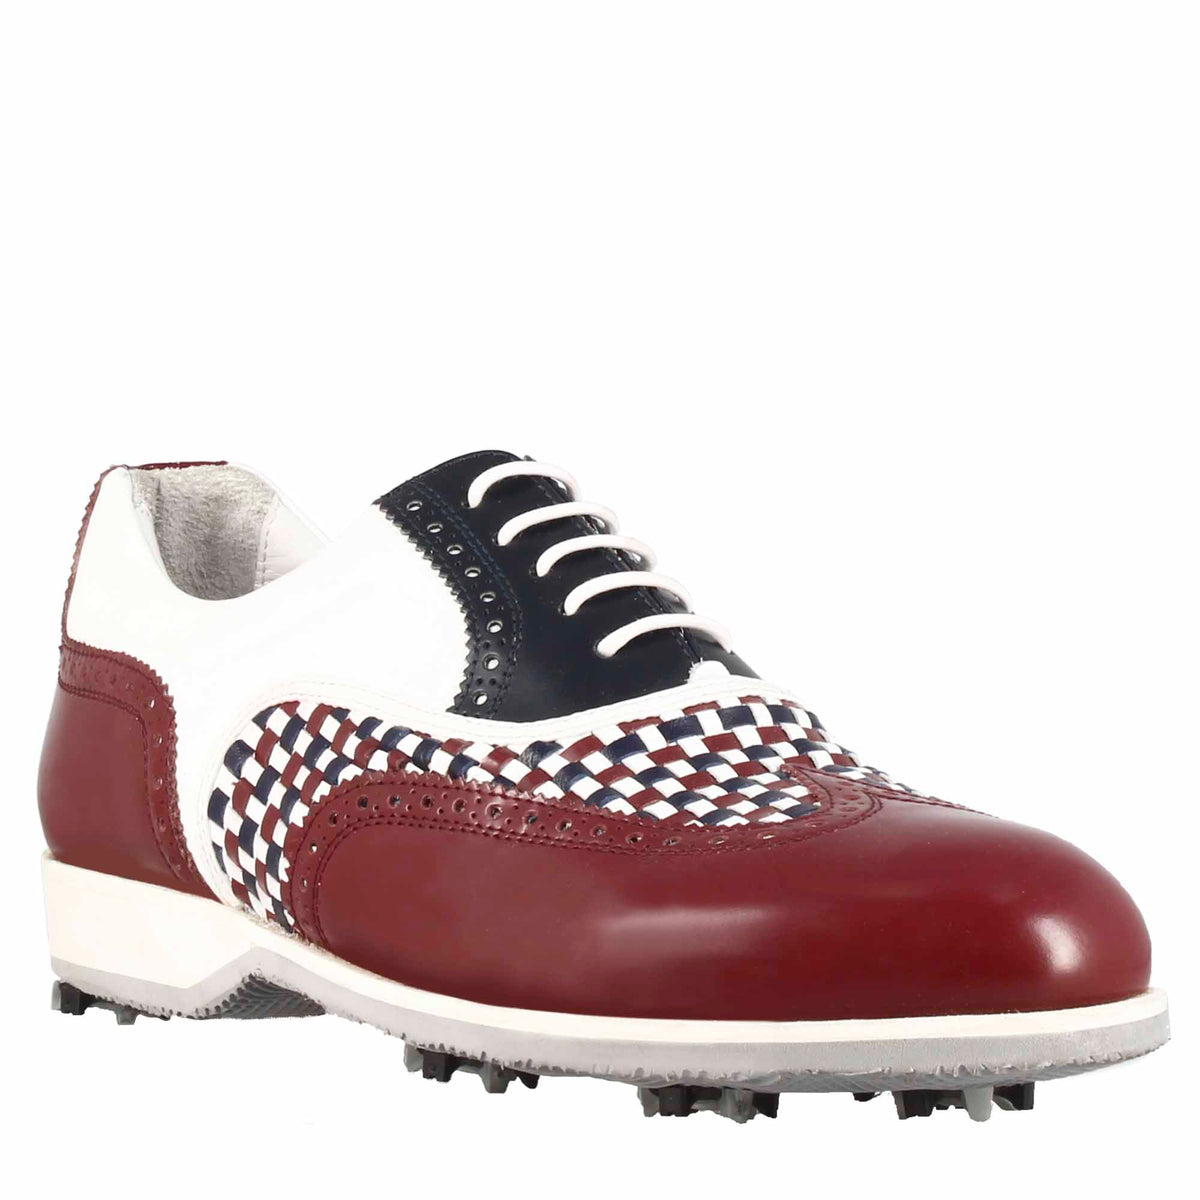 Handcrafted woman's golf shoes in white leather with blue and burgundy details